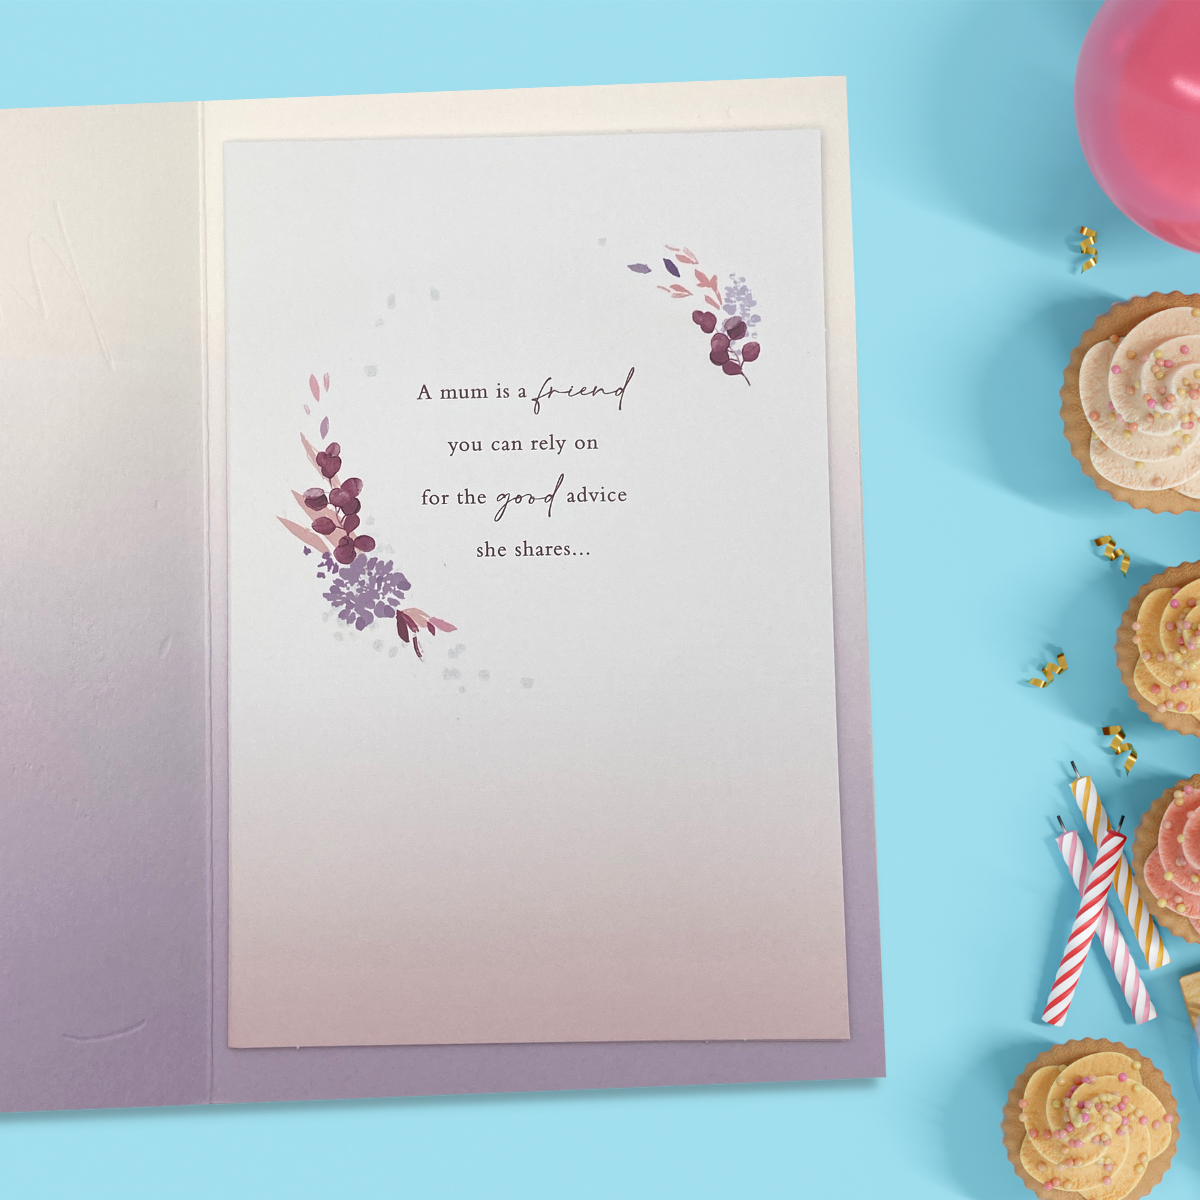 Inside image with lilac and pink flowers and words